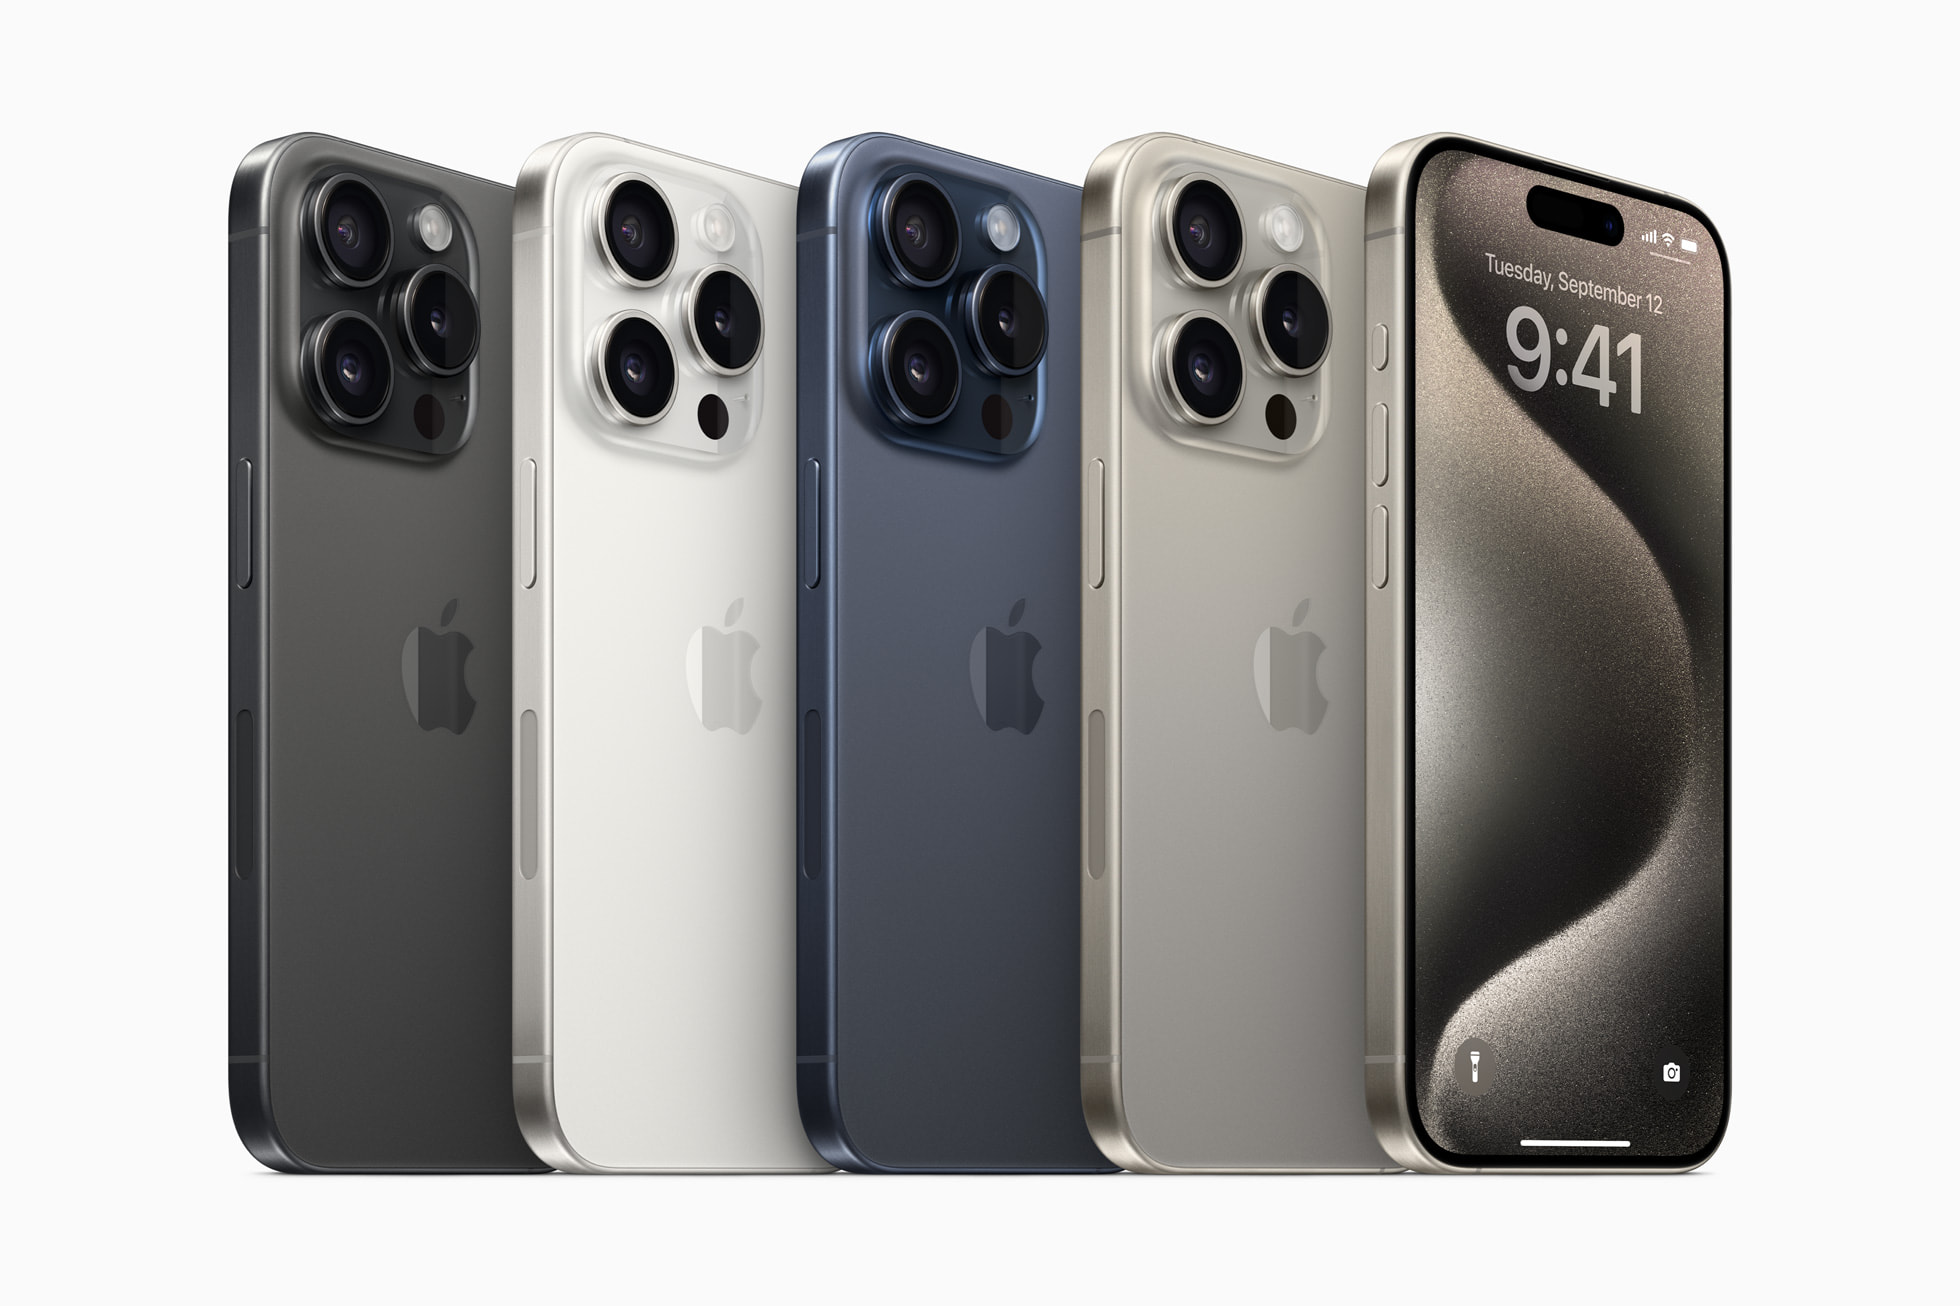 An image of all color finishes of the iPhone 15 Pro lineup.